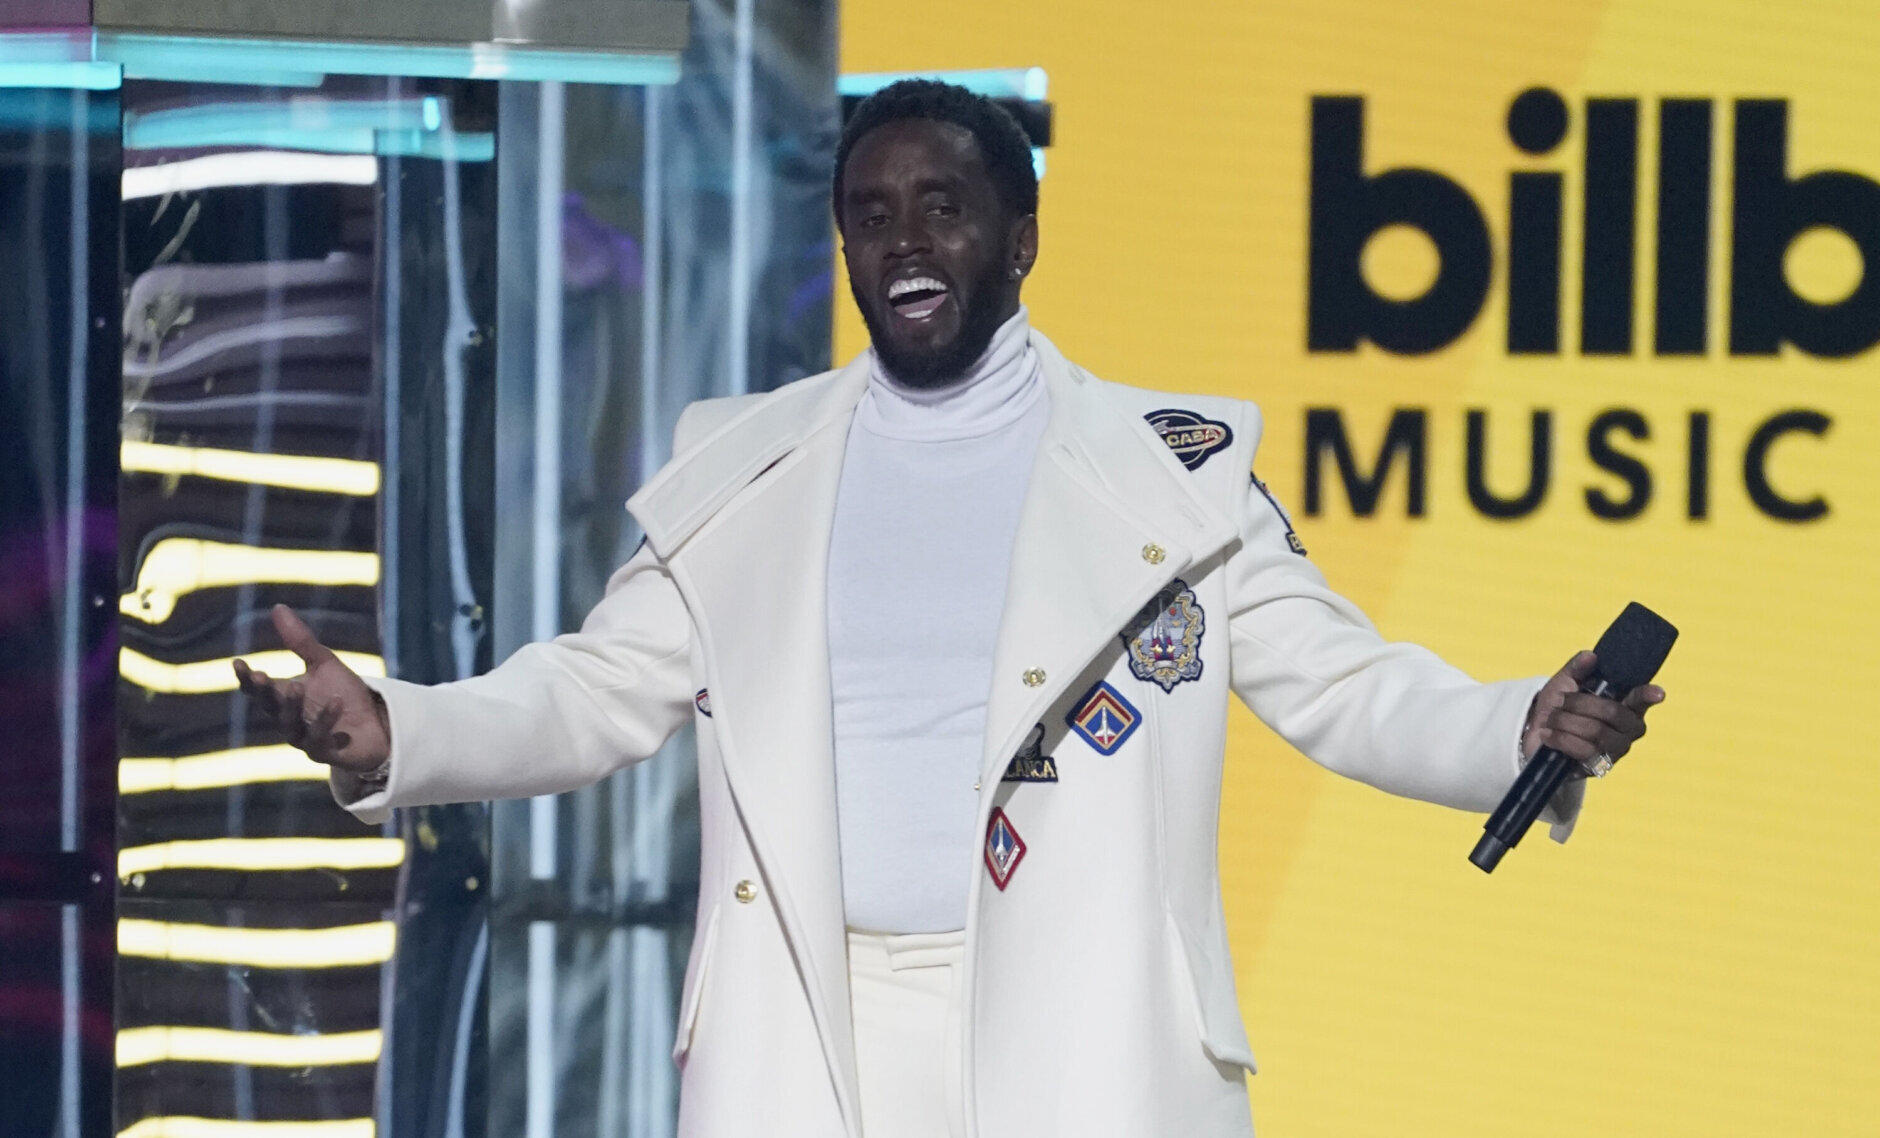 Host Sean "Diddy" Combs speaks at the Billboard Music Awards on Sunday, May 15, 2022, at the MGM Grand Garden Arena in Las Vegas. (AP Photo/Chris Pizzello)